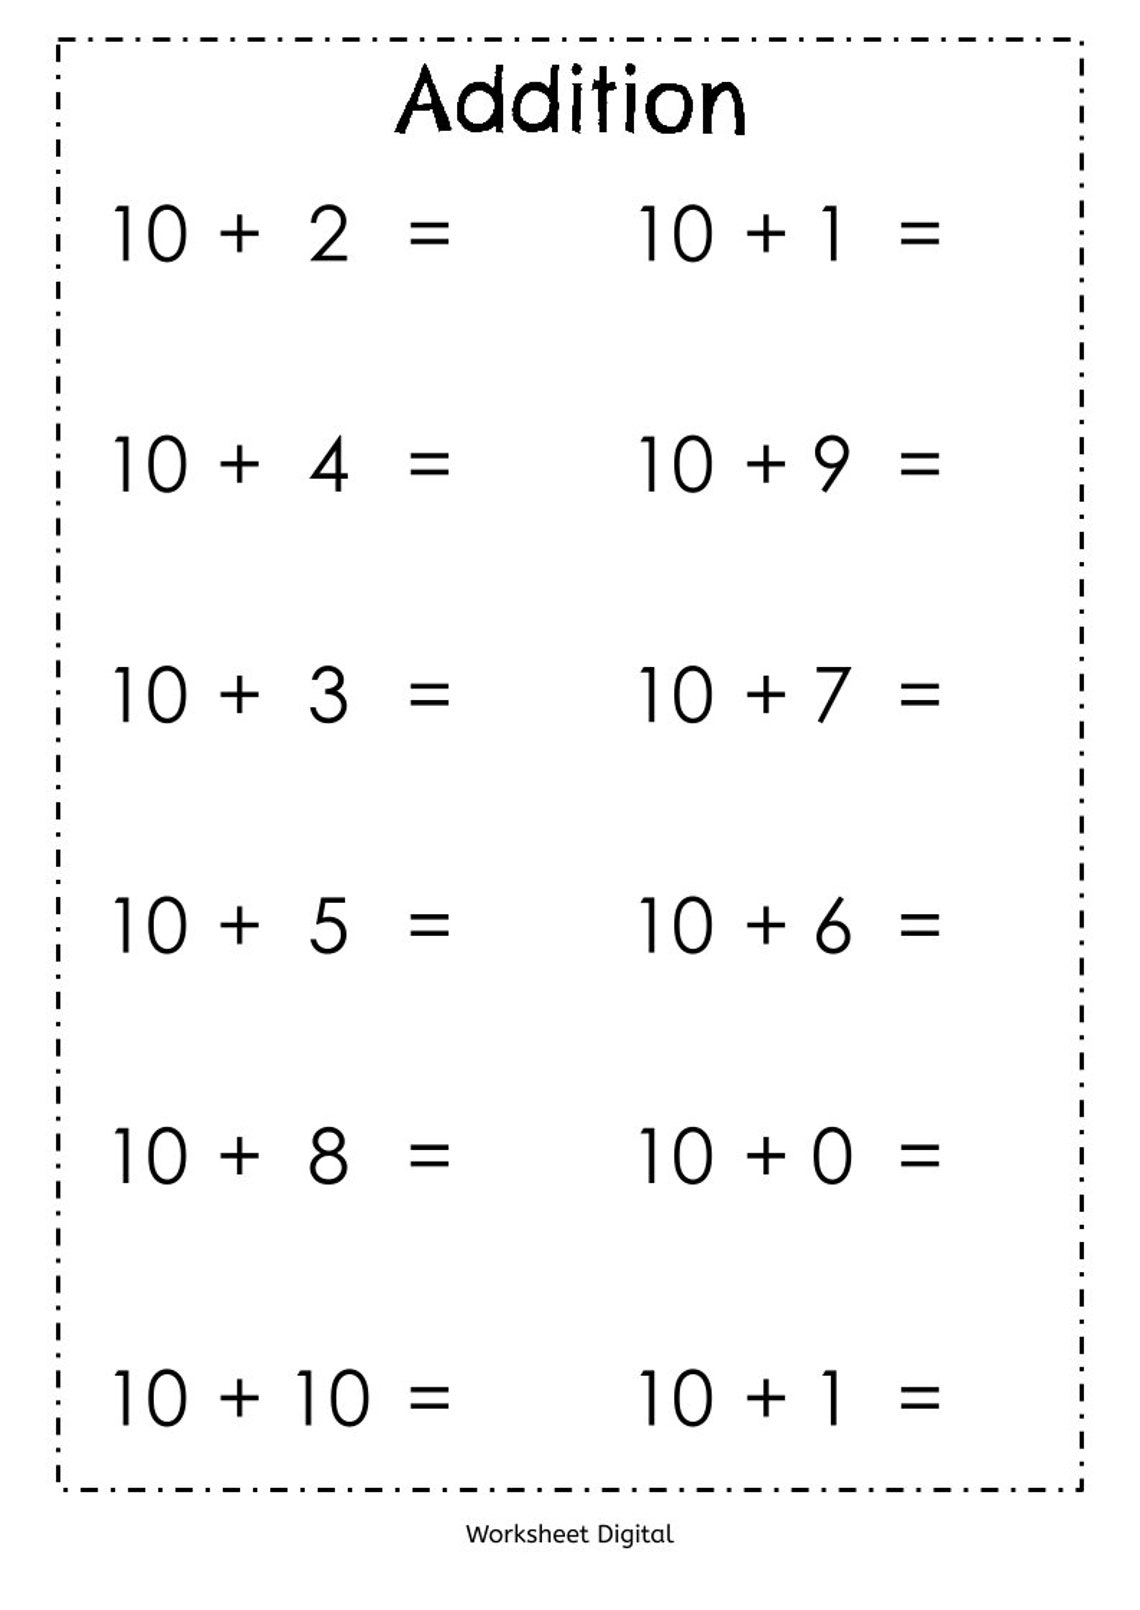 20-printable-addition-worksheets-numbers-1-10-for-preschool-etsy